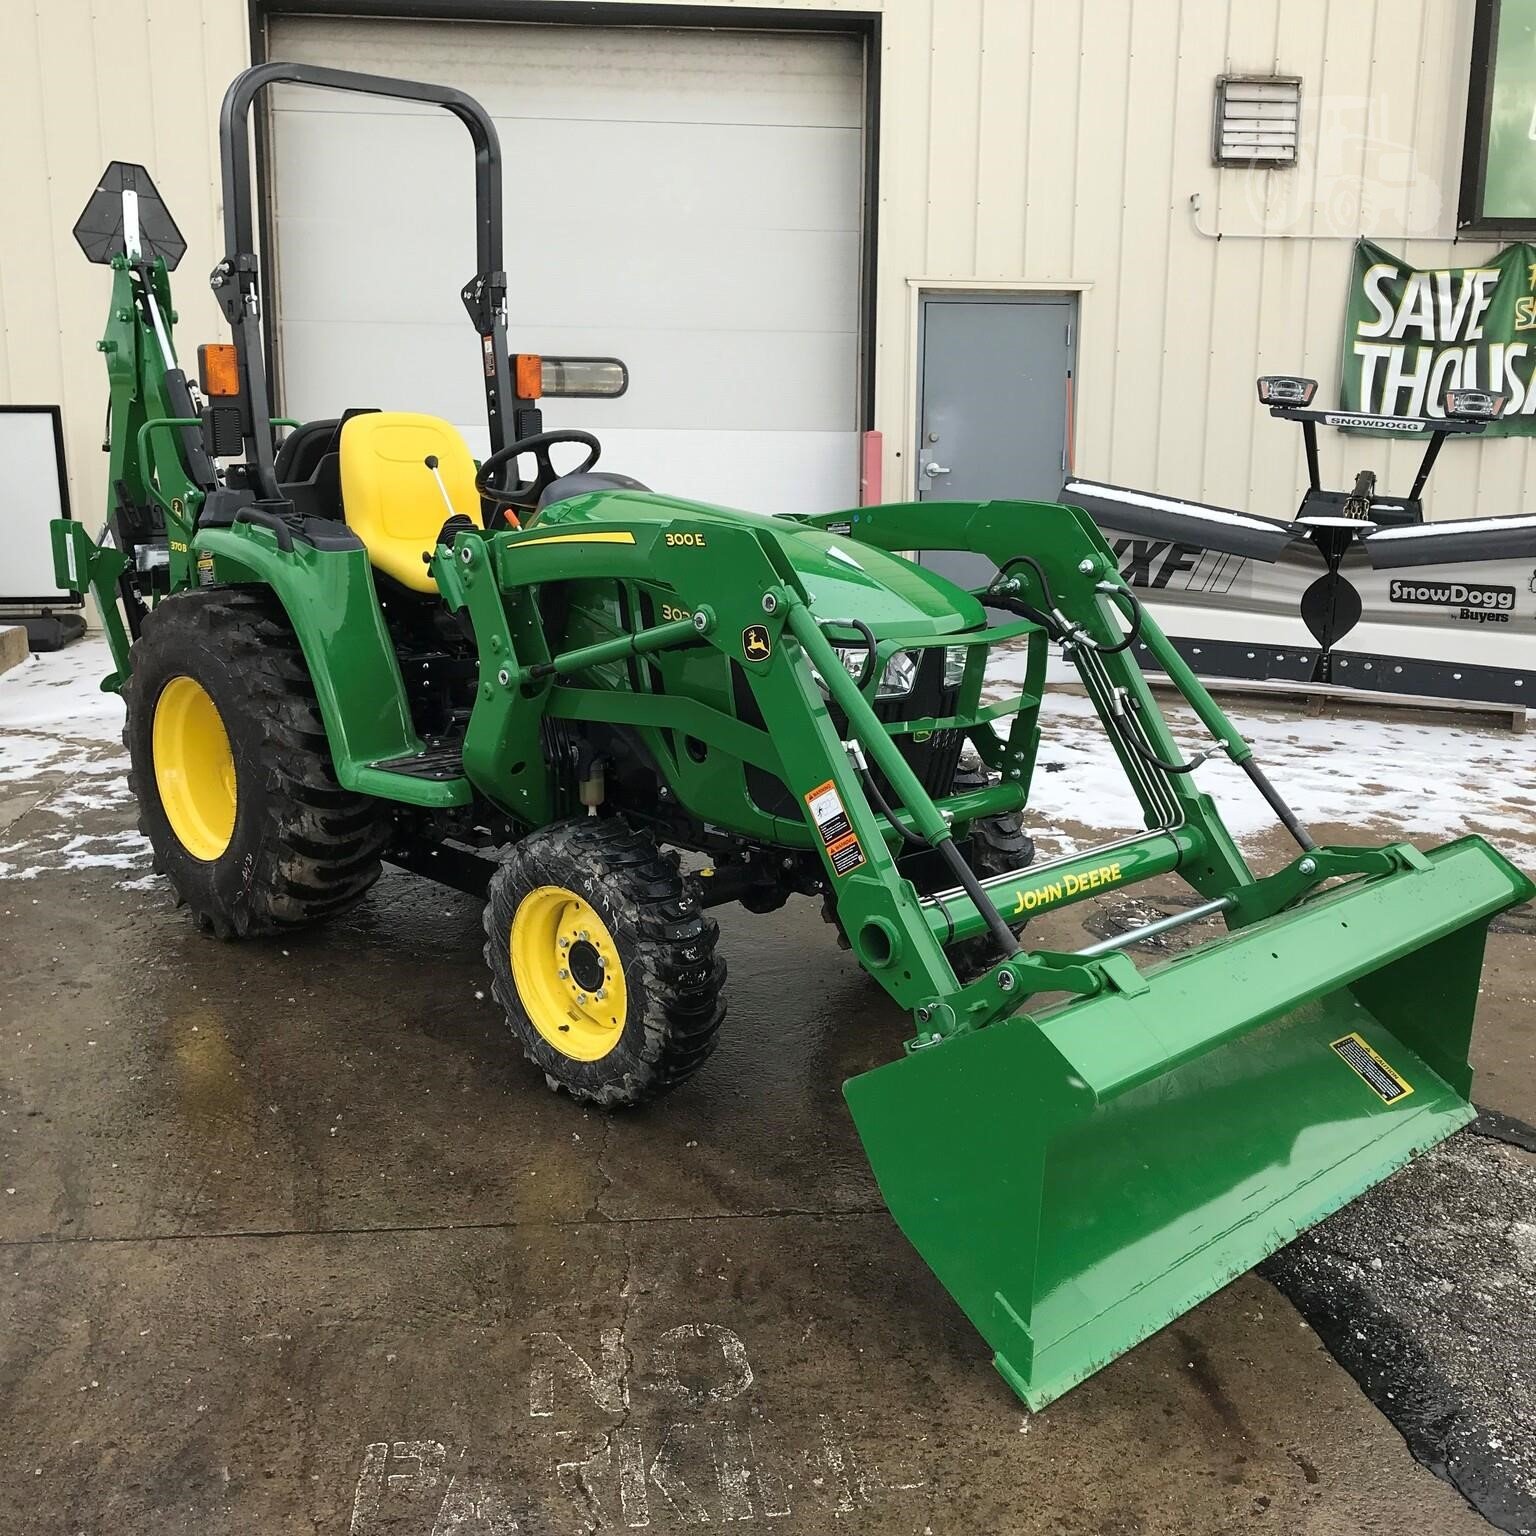 John Deere 3025e For Sale In Ohio 7 Listings Tractorhouse Com Page 1 Of 1